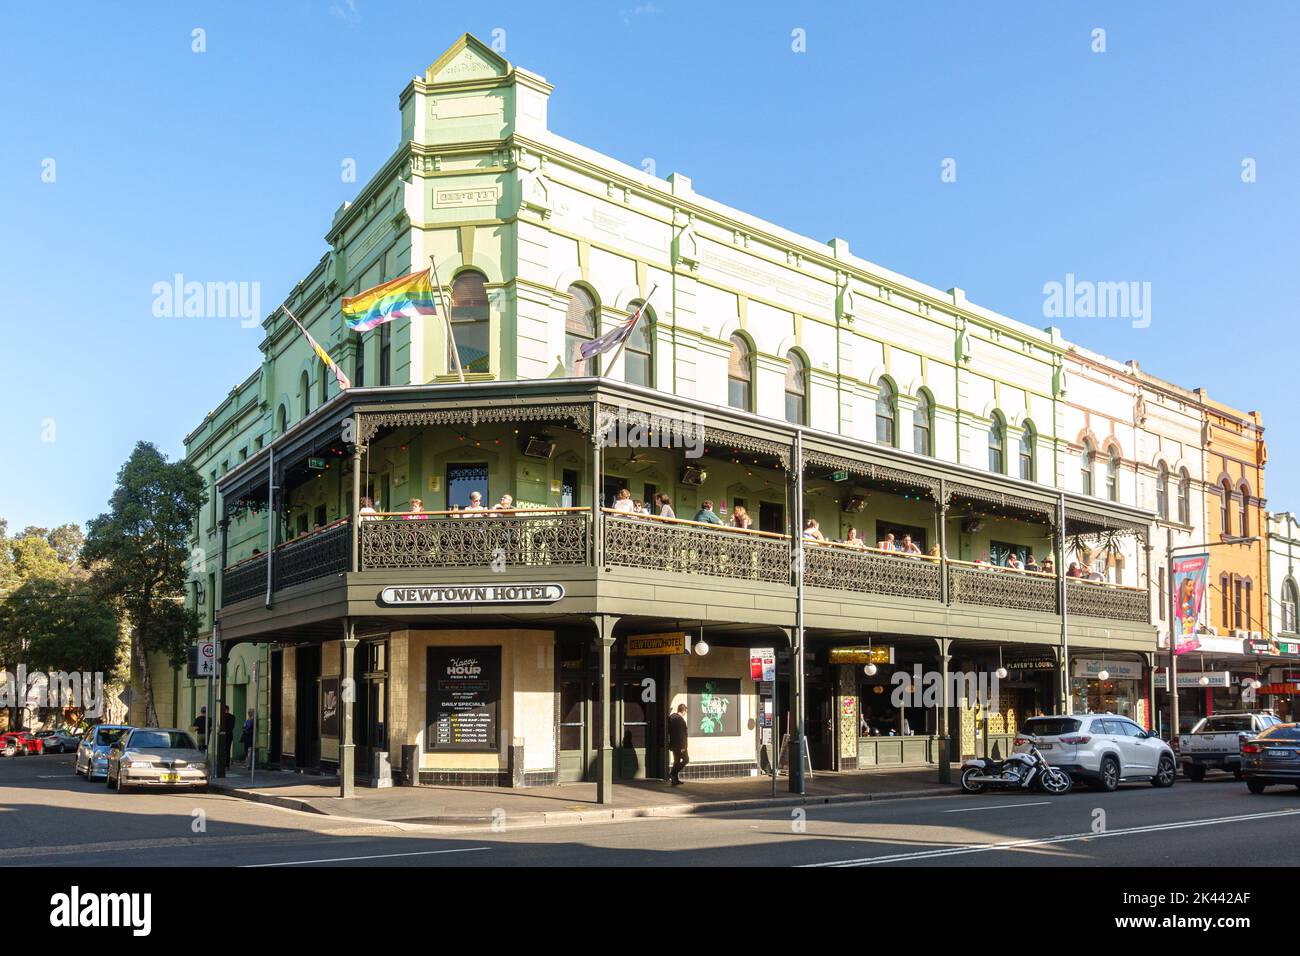 The Newtown Hotel on North King Street on a sunny afternoon Stock Photo